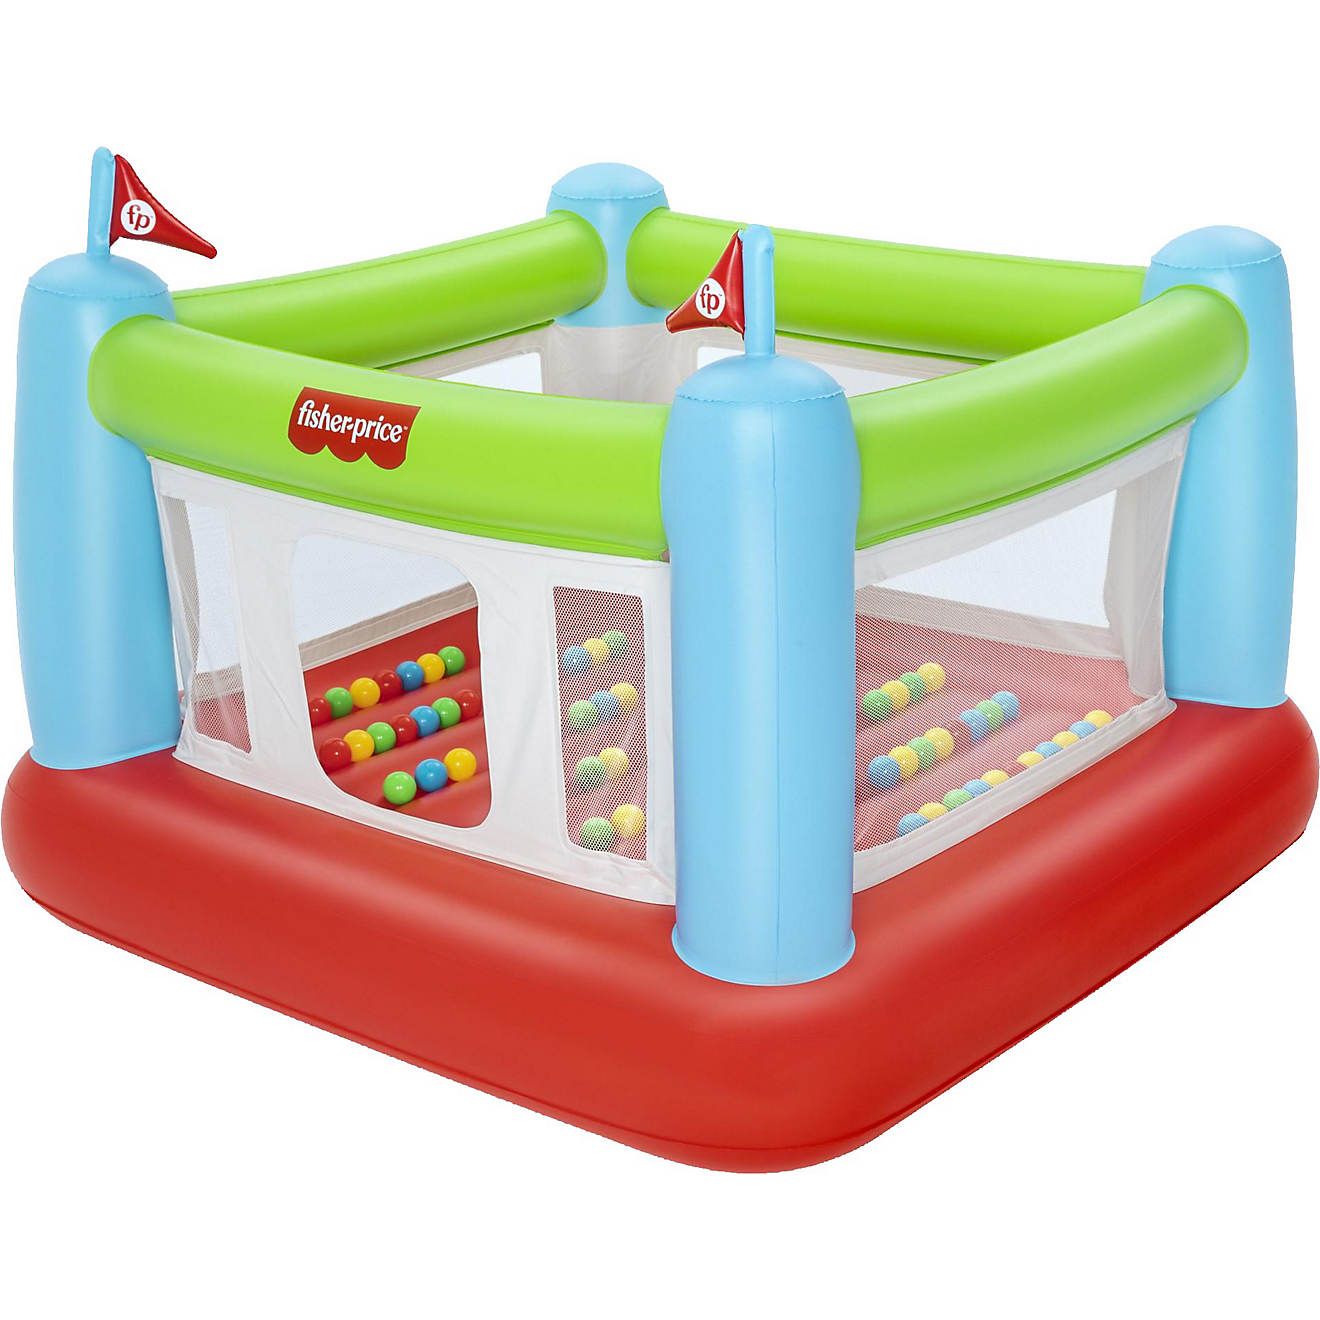 Fisher-Price Bouncesational Bouncer | Academy | Academy Sports + Outdoors